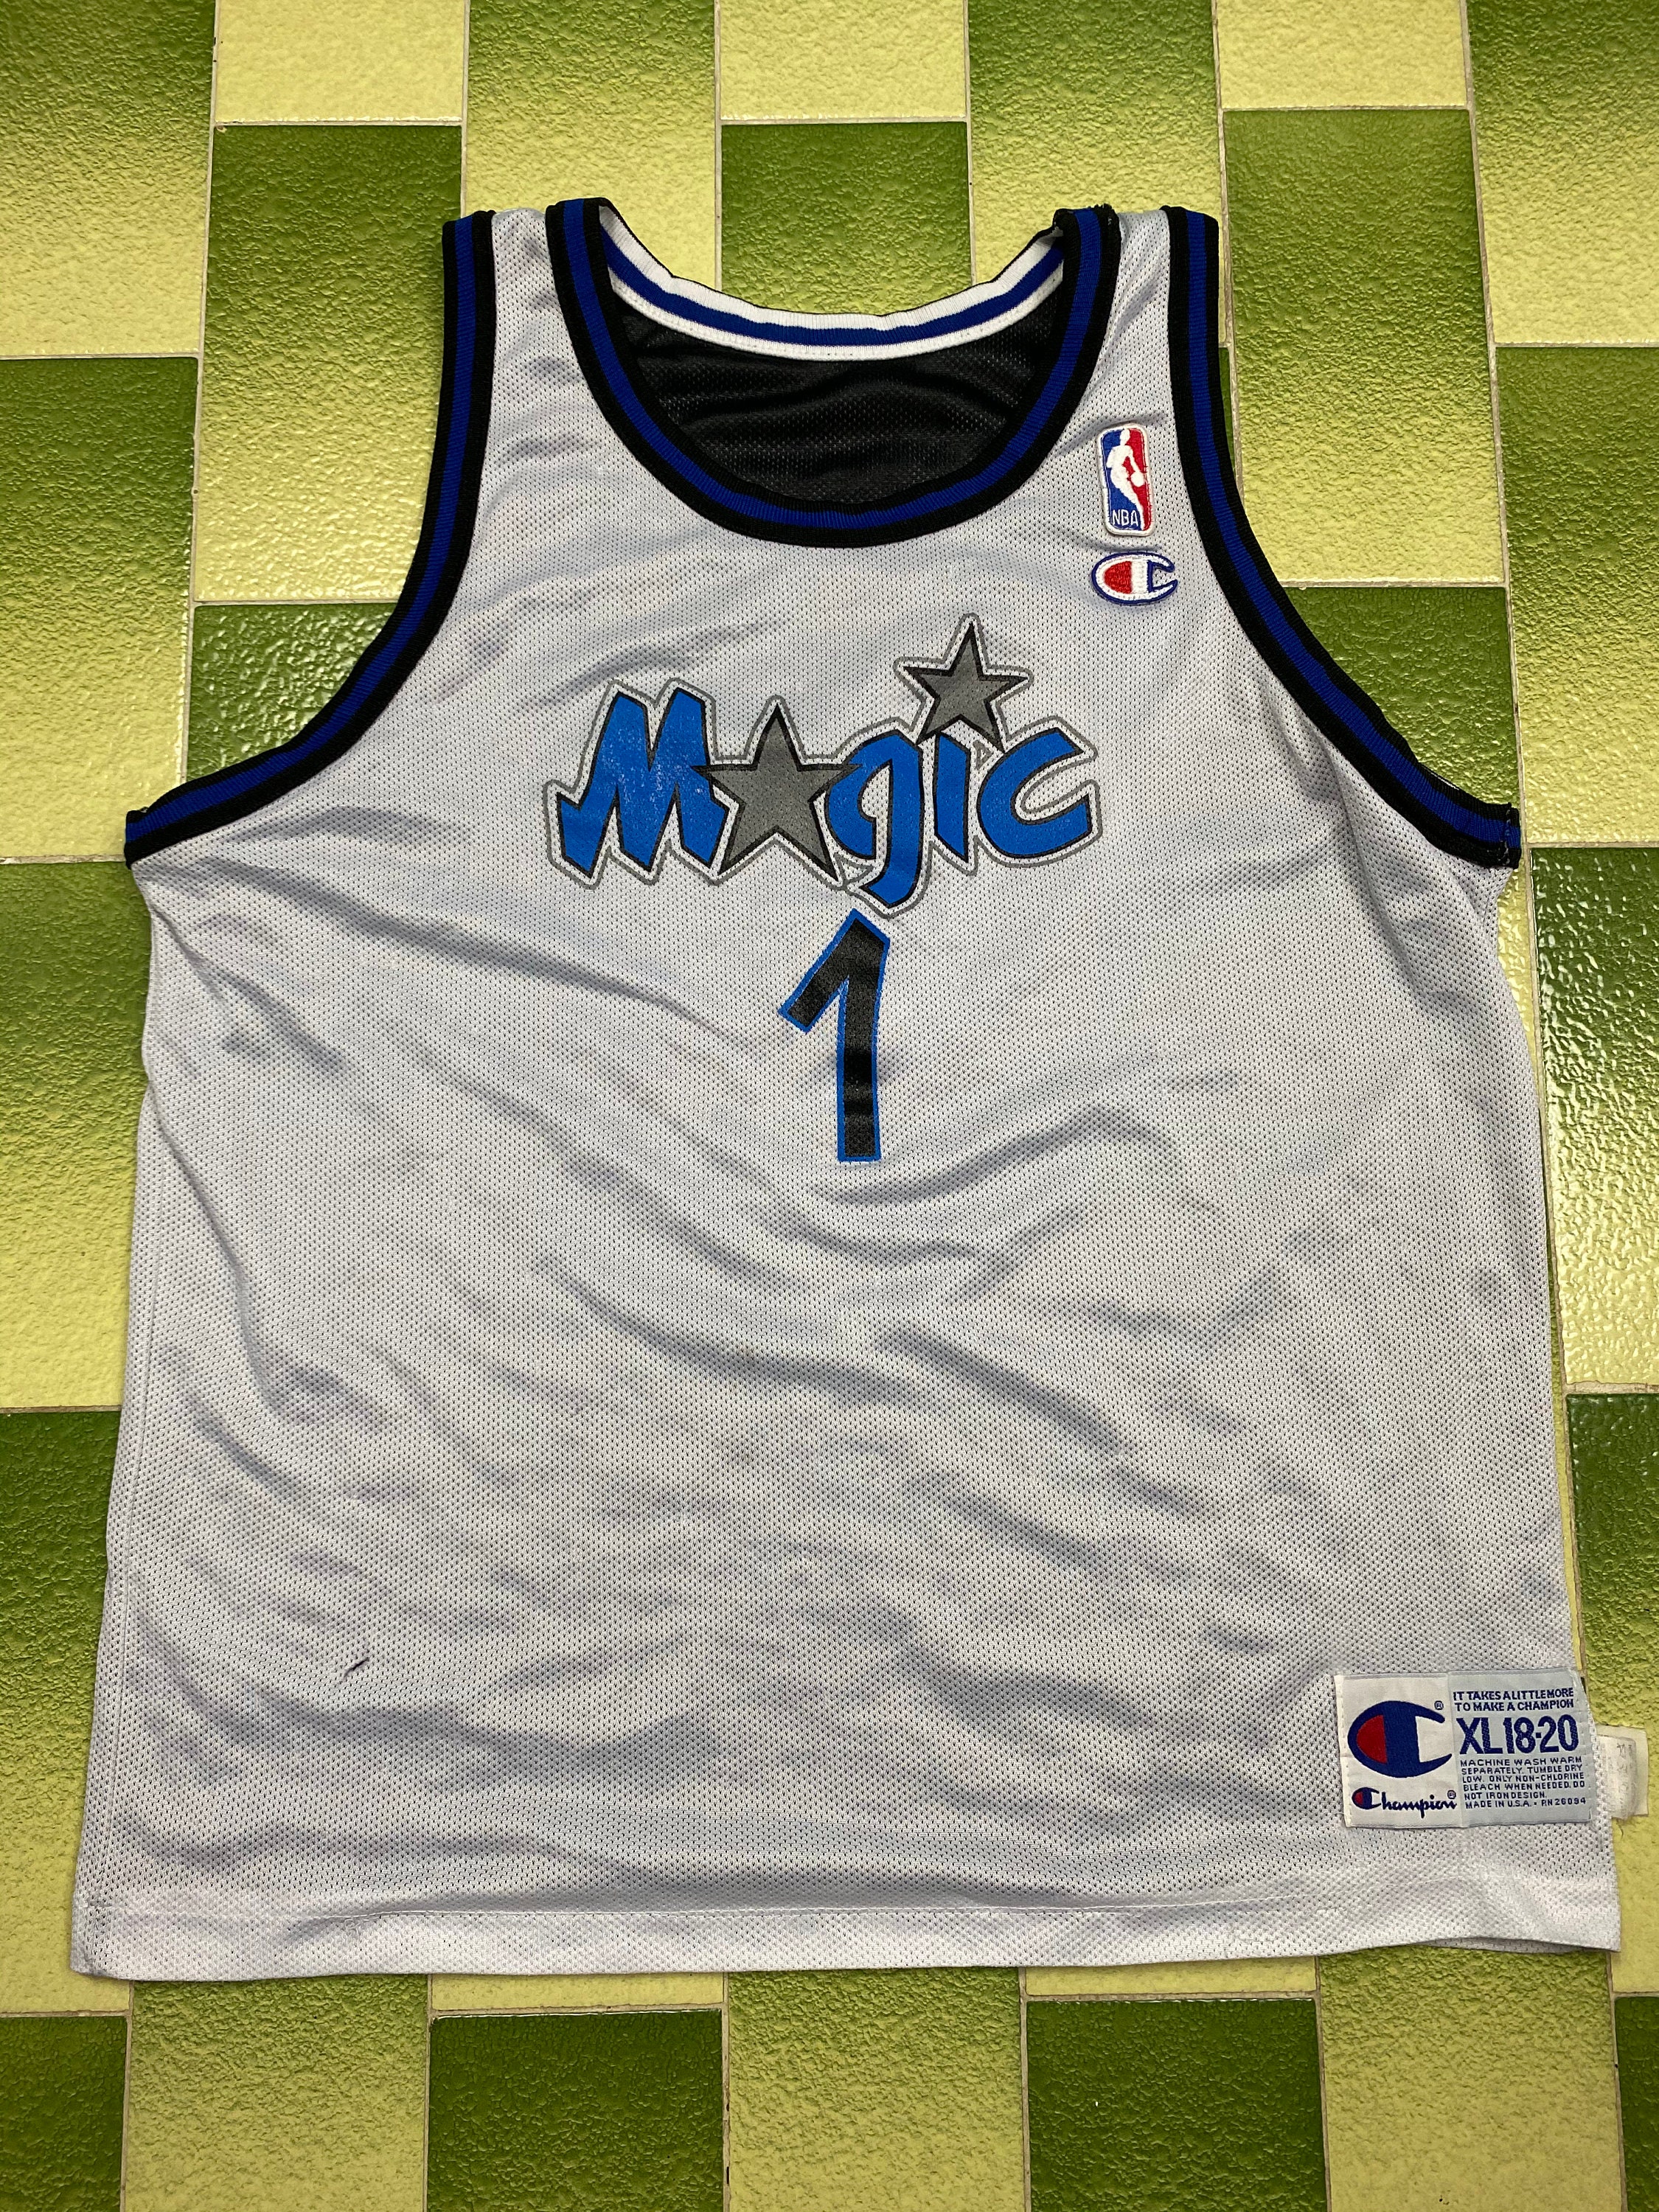 Vintage Orlando Magic Champion Hockey Jersey – For All To Envy